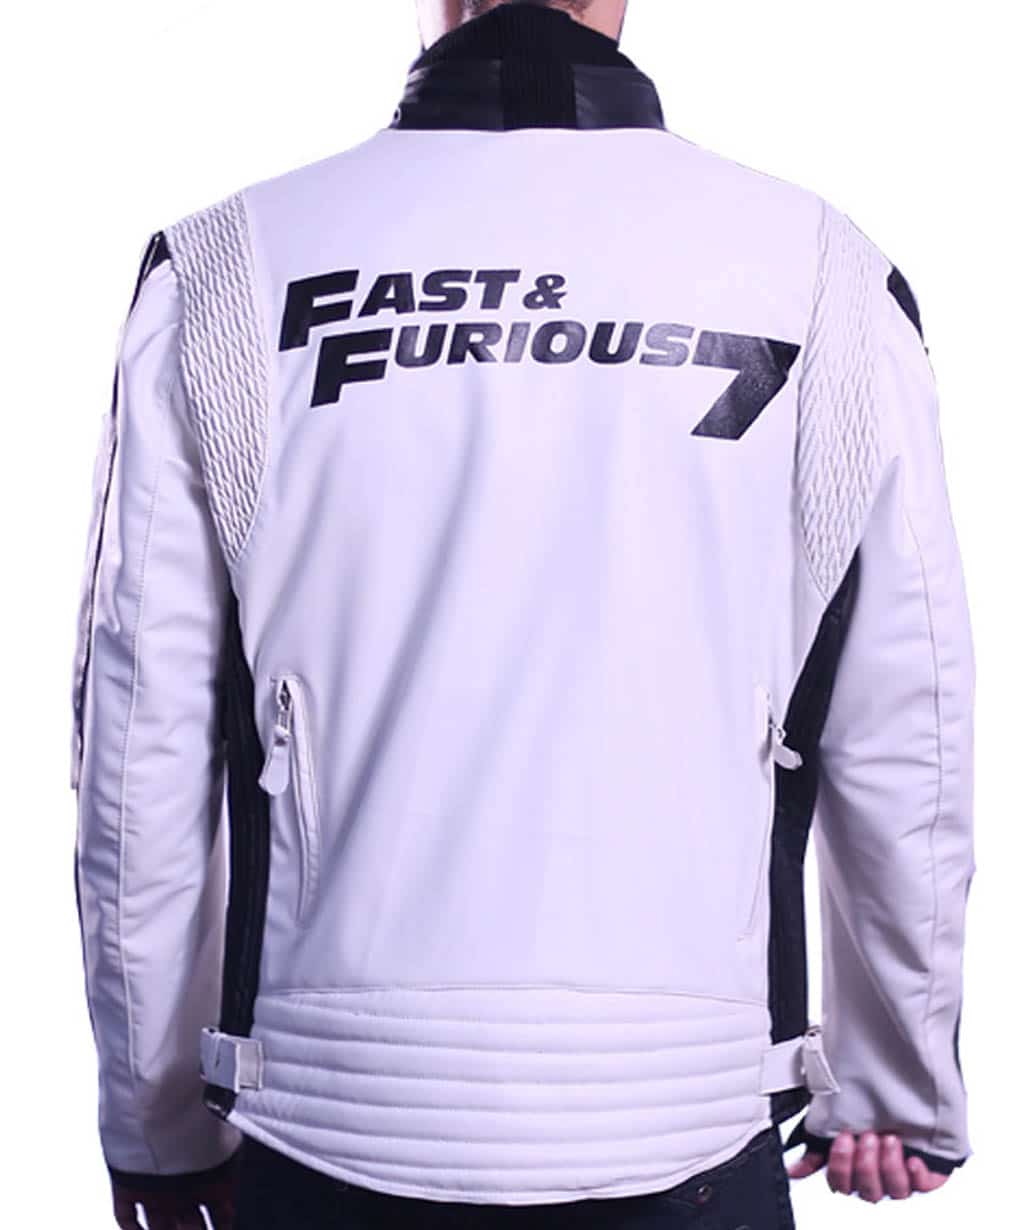 Vin-Diesel-Fast-And-Furious-7-Racing-White-Jacket-Sale-online-Free-Shipping